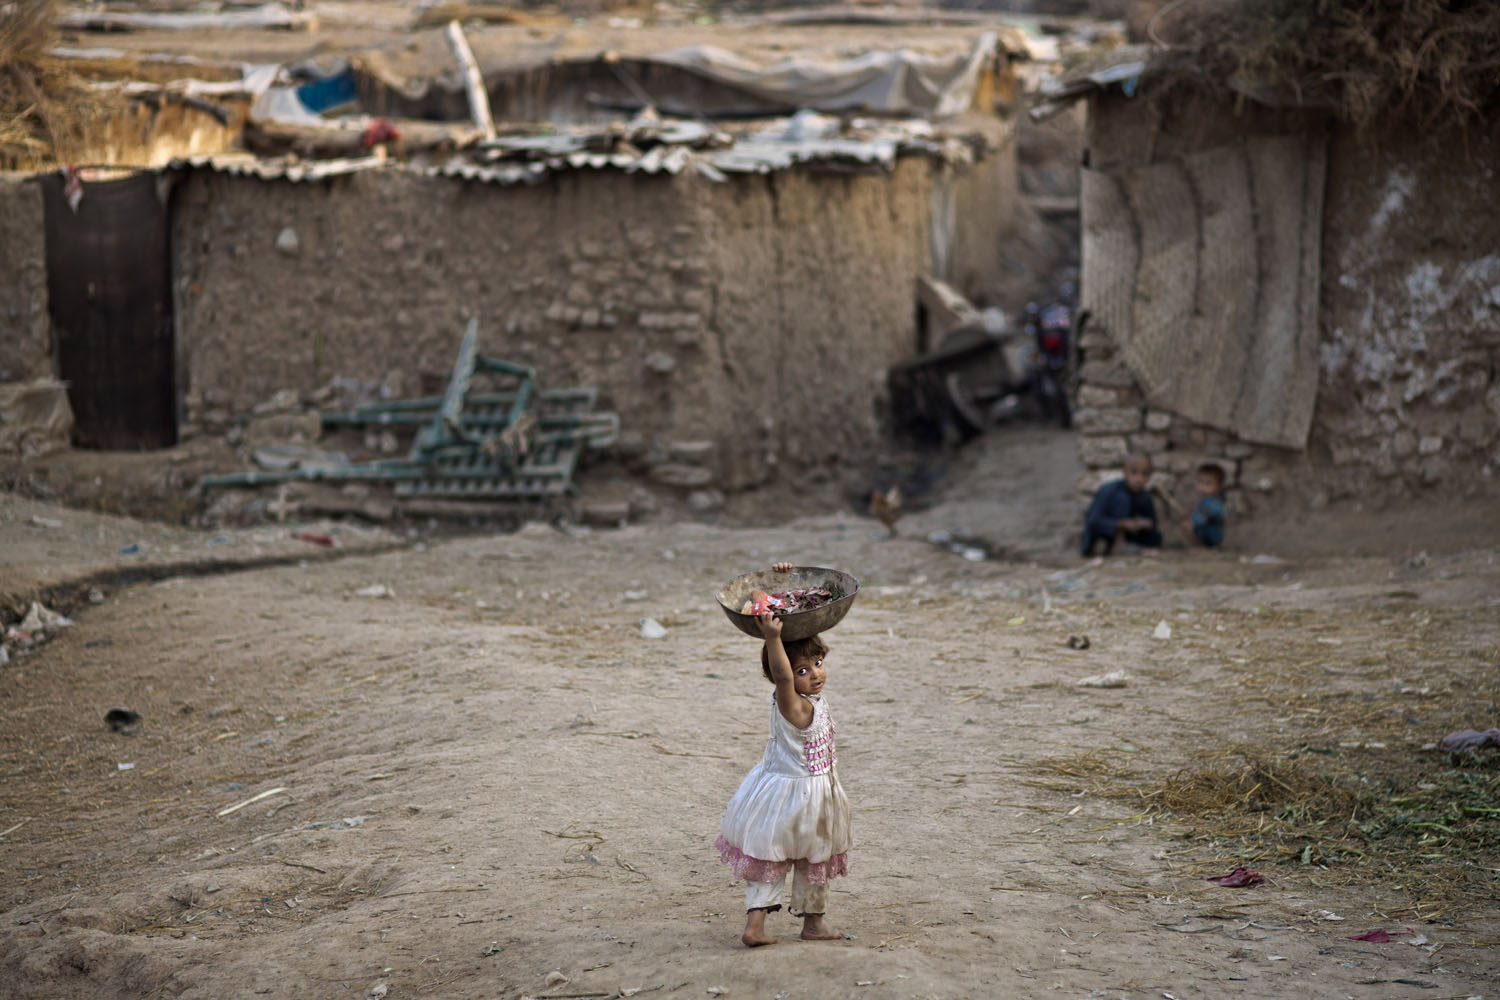 Oct. 23, 2013. An Afghan refugee child looks behind her while walking back to her home in a poor neighborhood on the outskirts of Islamabad, Pakistan.